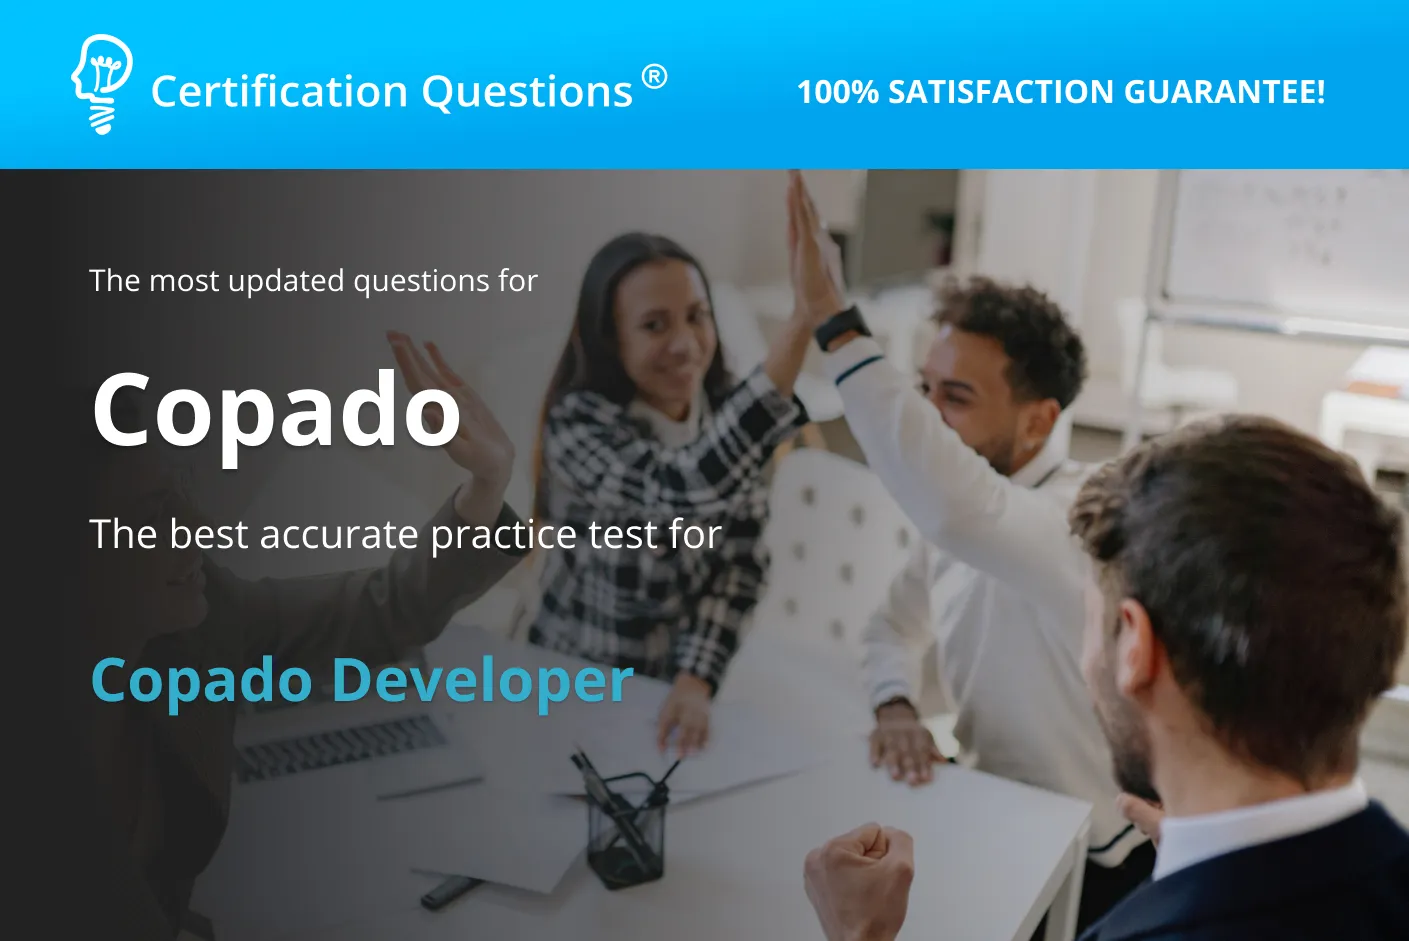 This is the image about Copado Developer Certification Questions